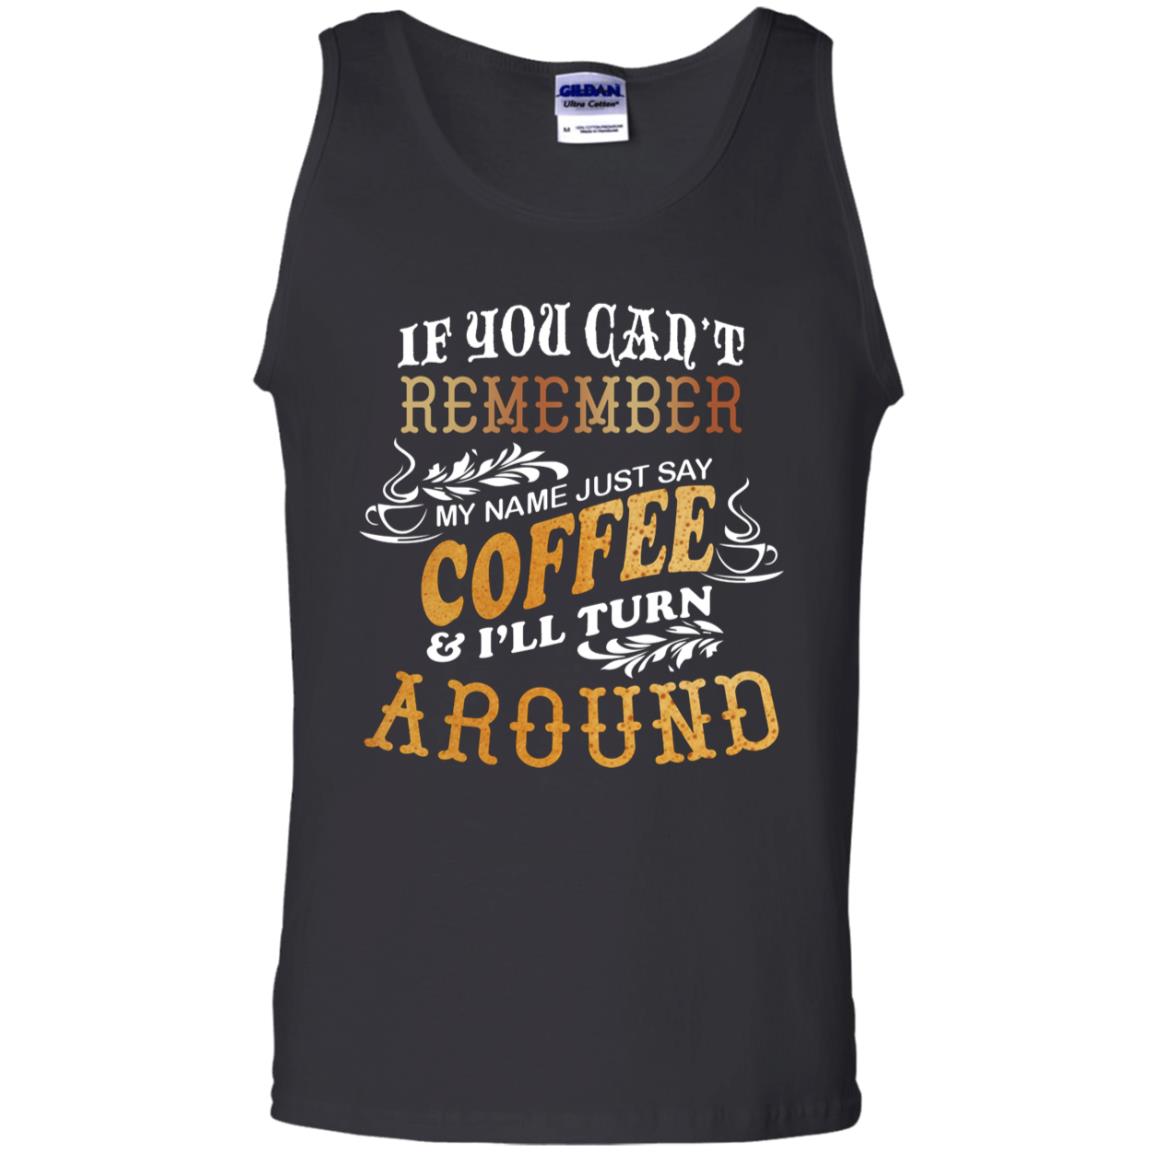 If You Can't Remember Coffee My Name Just Say And I'll Turn Around Shirt For Coffee LoversG220 Gildan 100% Cotton Tank Top